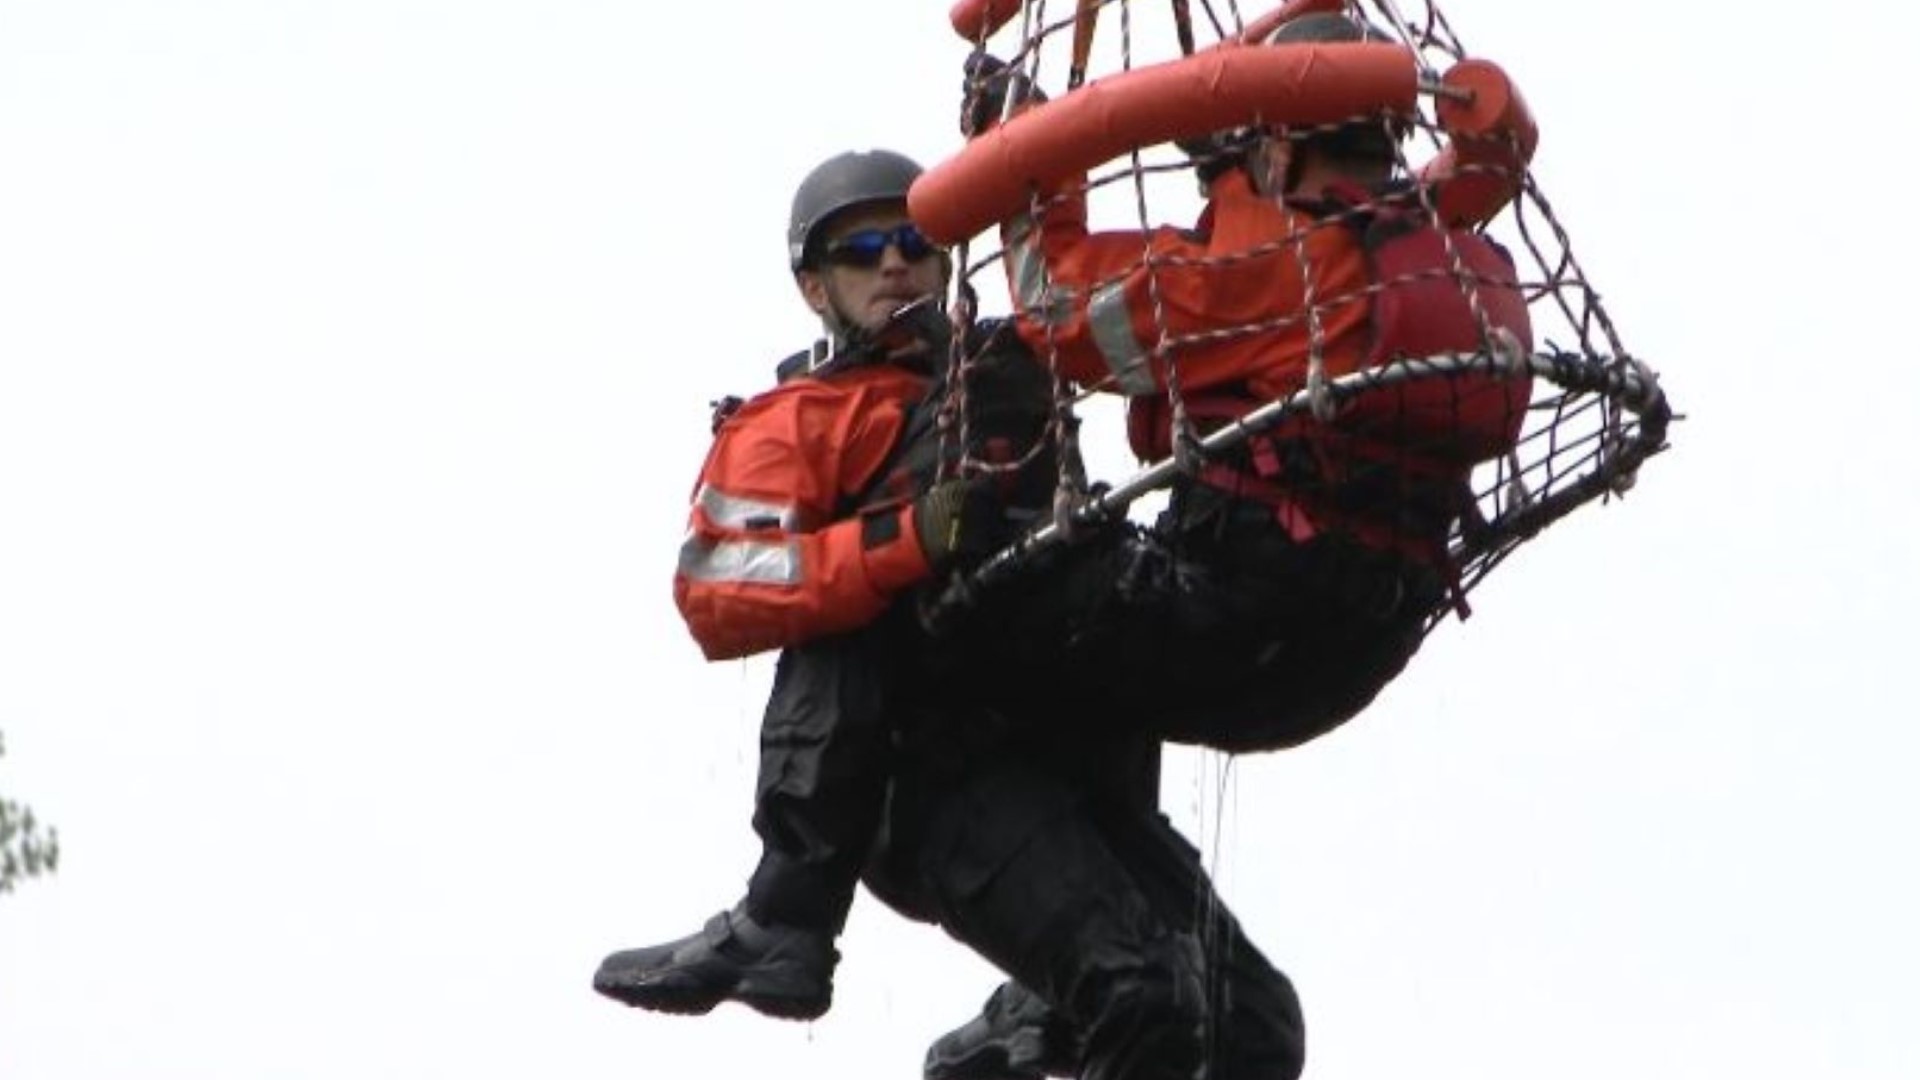 The Minnesota Air Rescue Team is a partnership between the Minnesota State Patrol Aviation Division and the St. Paul Fire Department Advanced Technical Rescue Team.